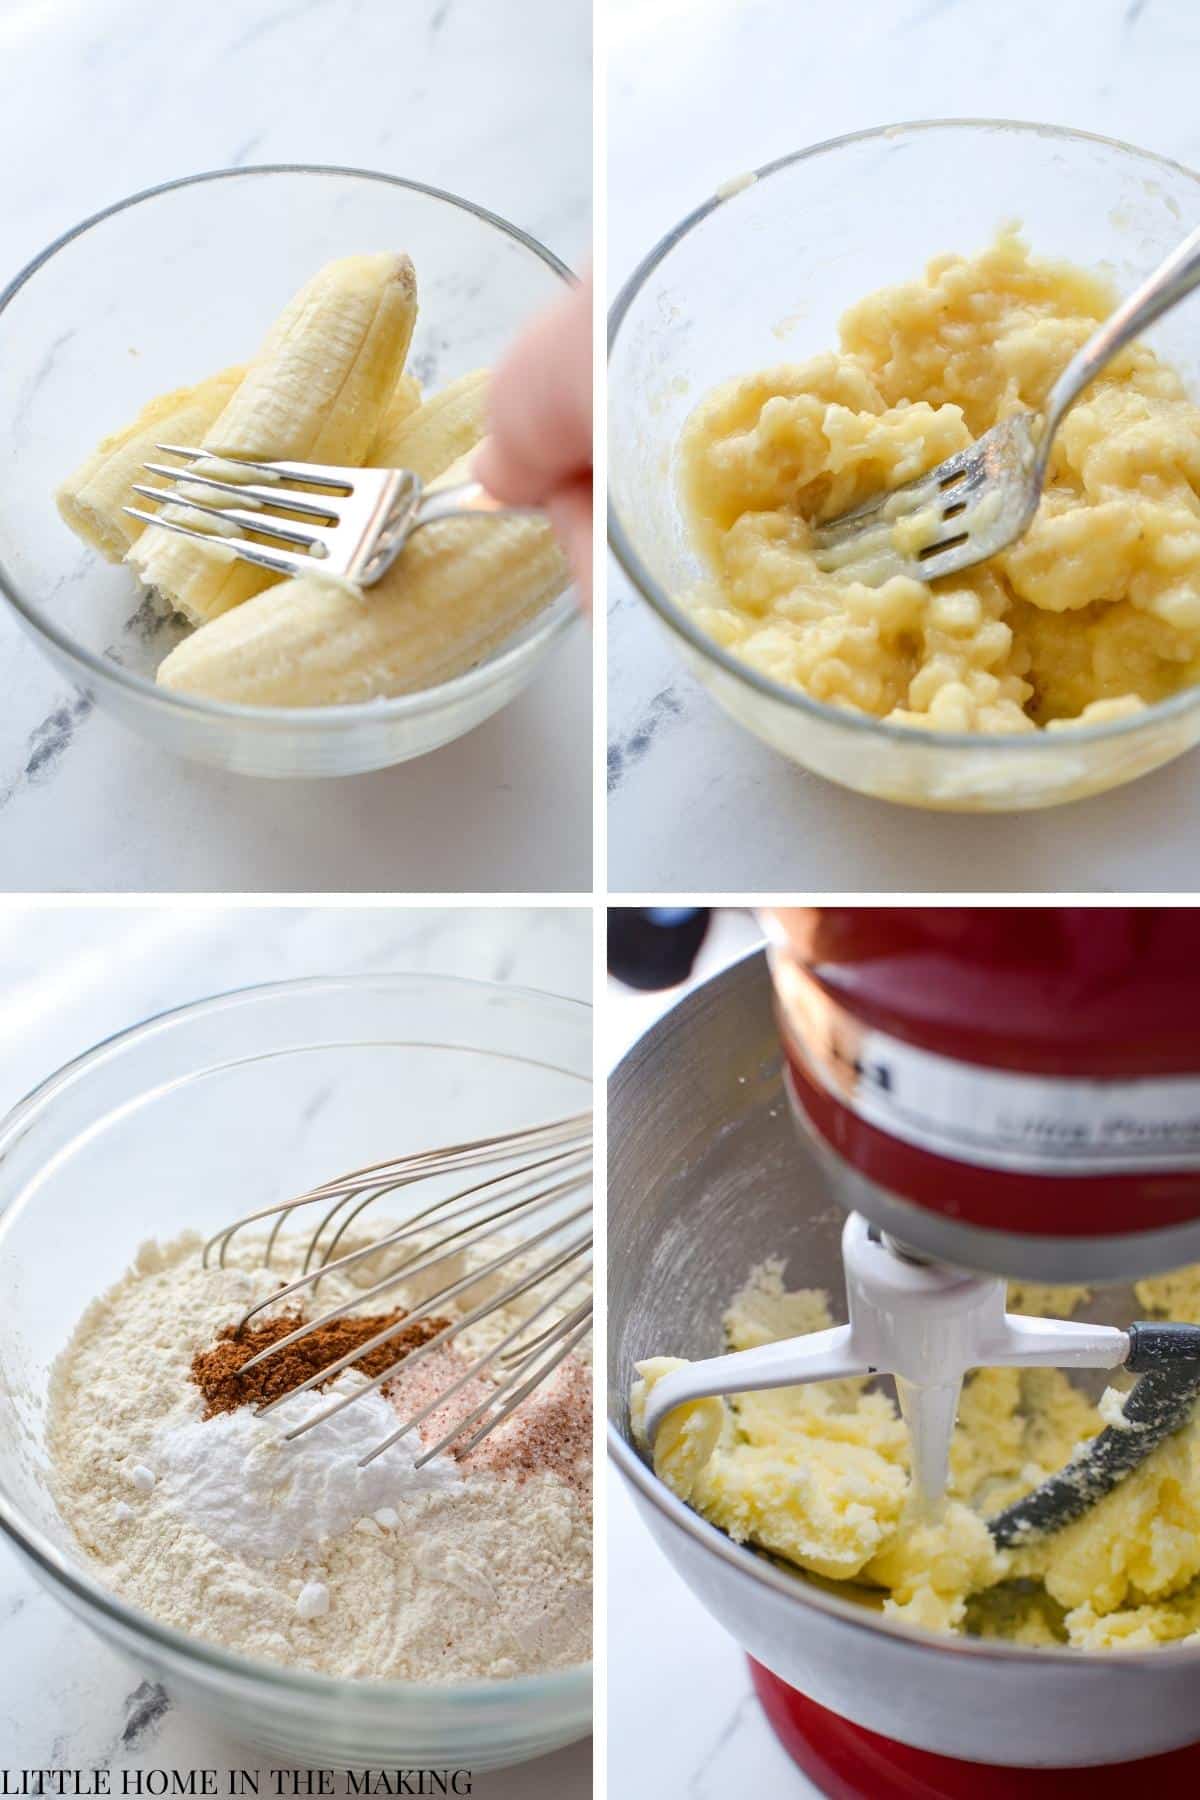 Mashing a ripe banana with a fork, then stirring together dry ingredients and creaming butter.